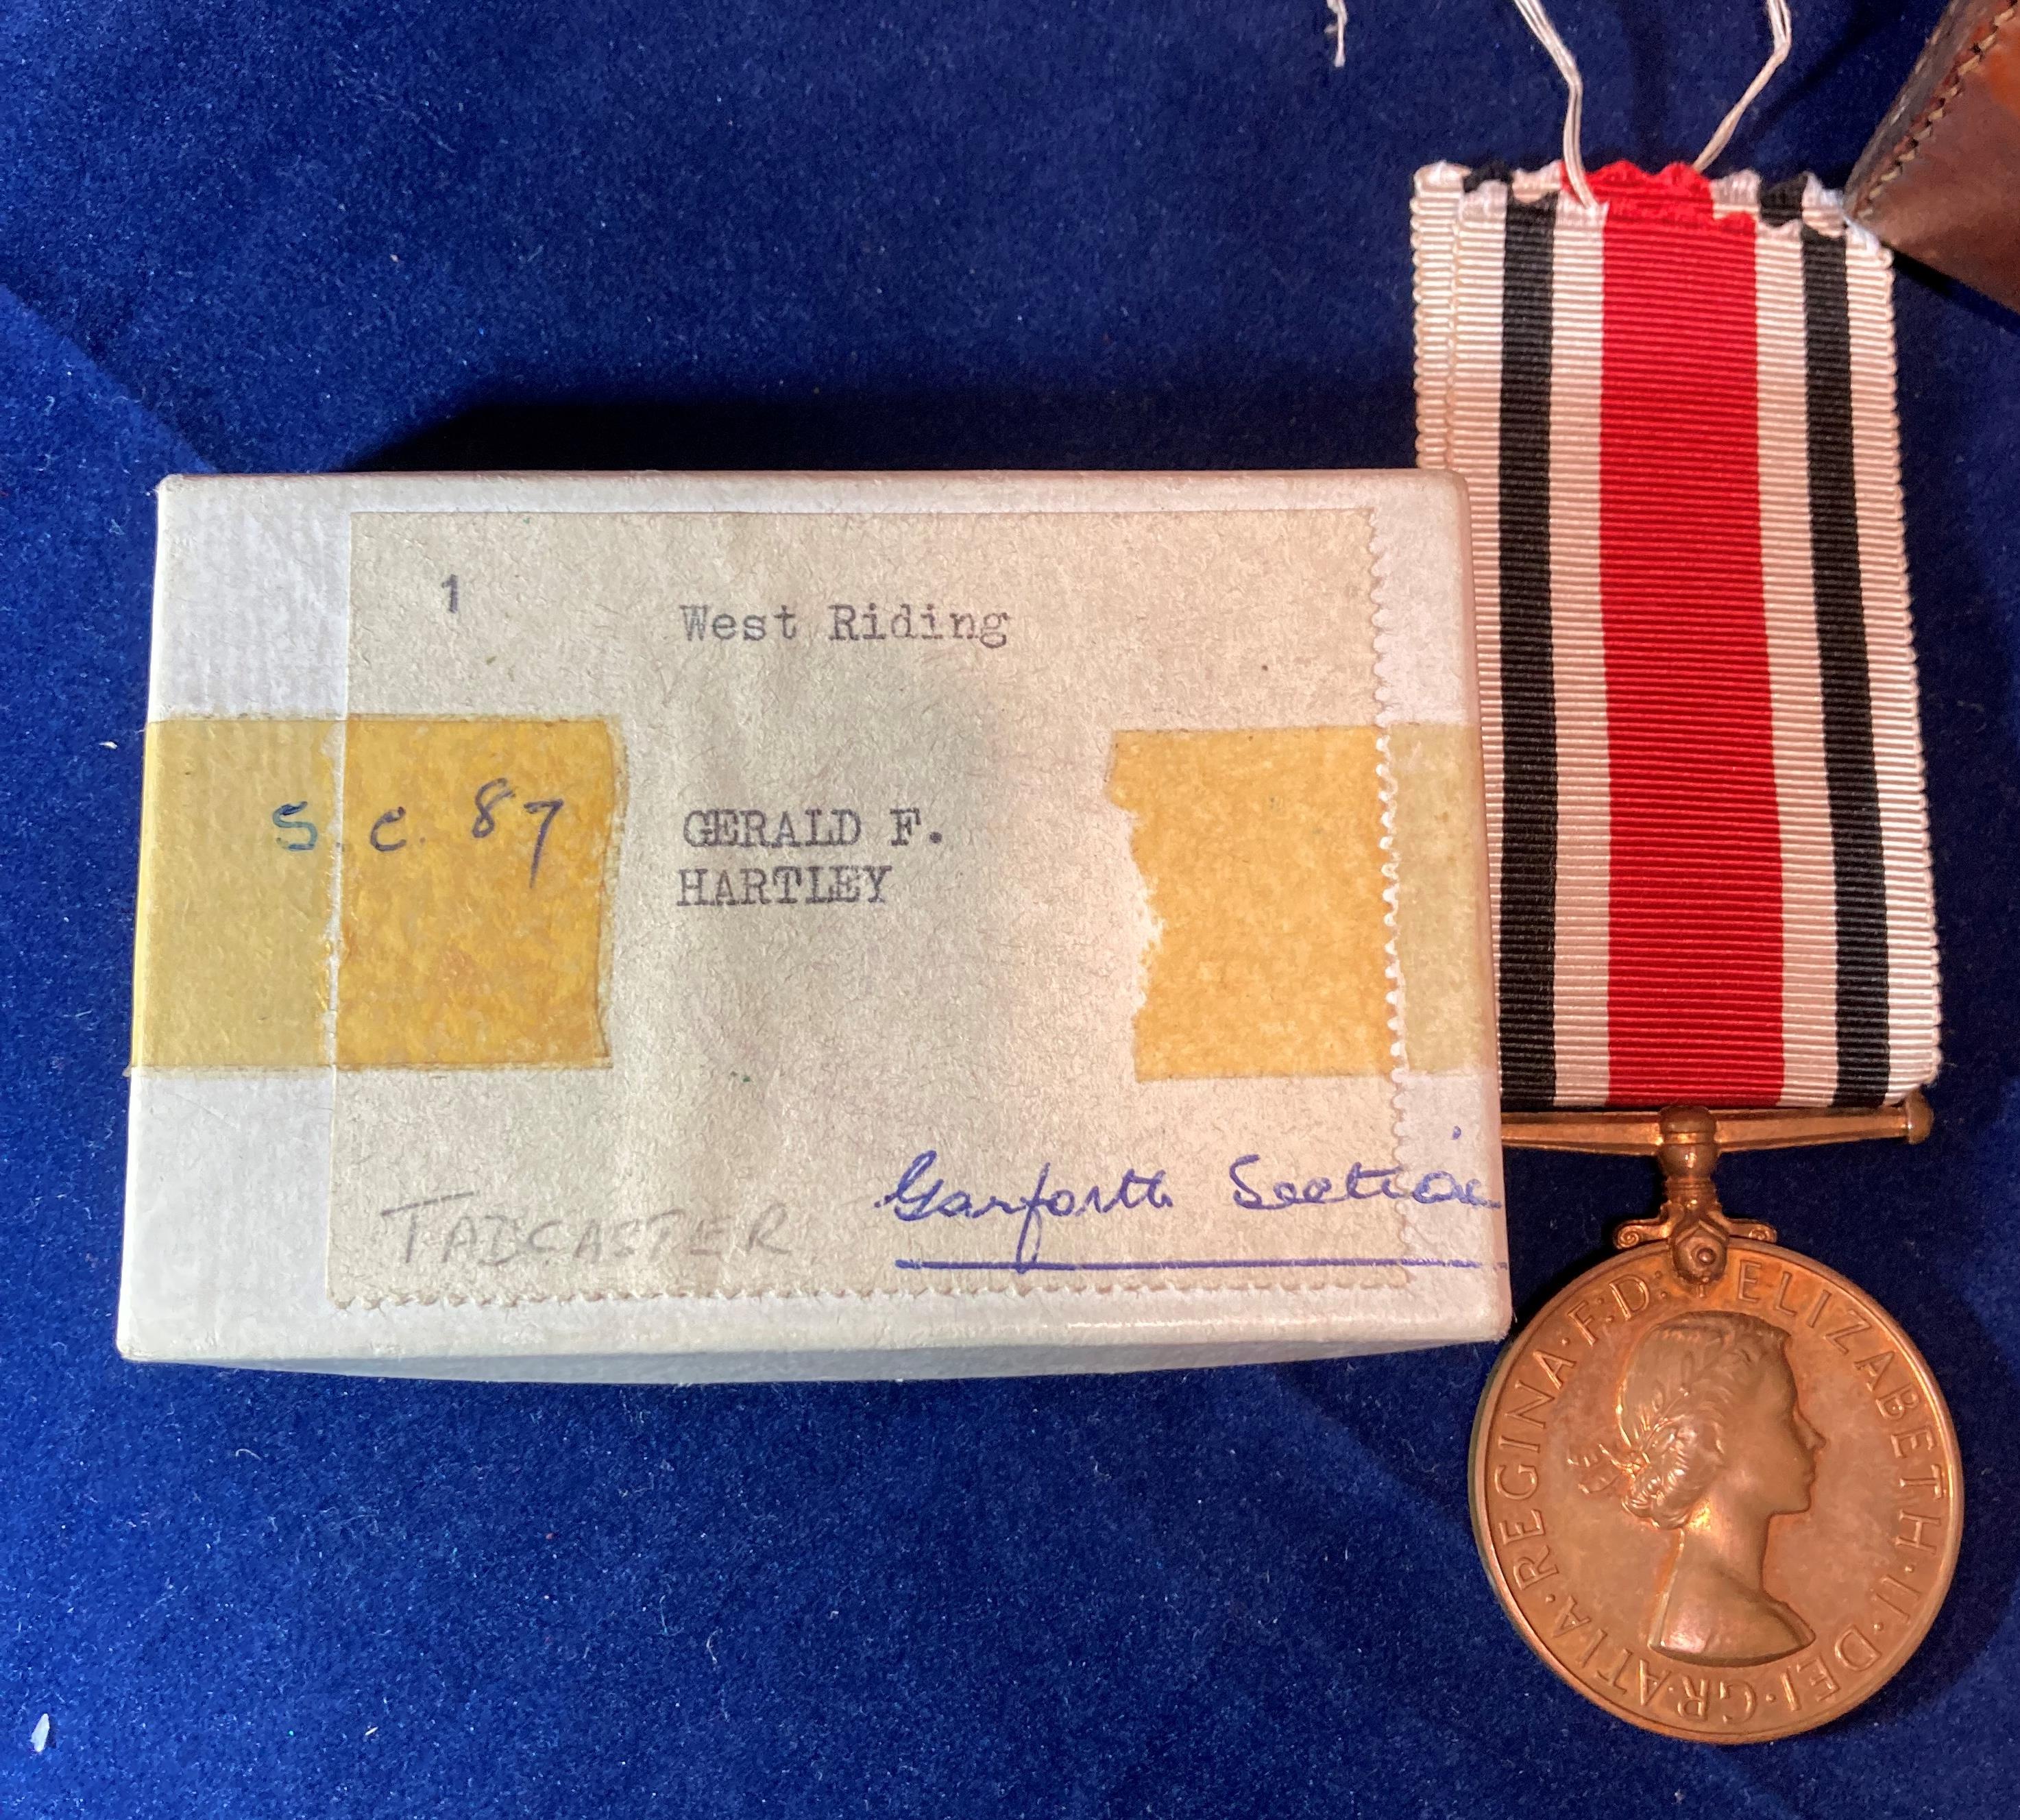 Special Constabulary Medal with ribbon to Gerald F Hartley S C 87 West Riding Garforth Section - Image 2 of 13